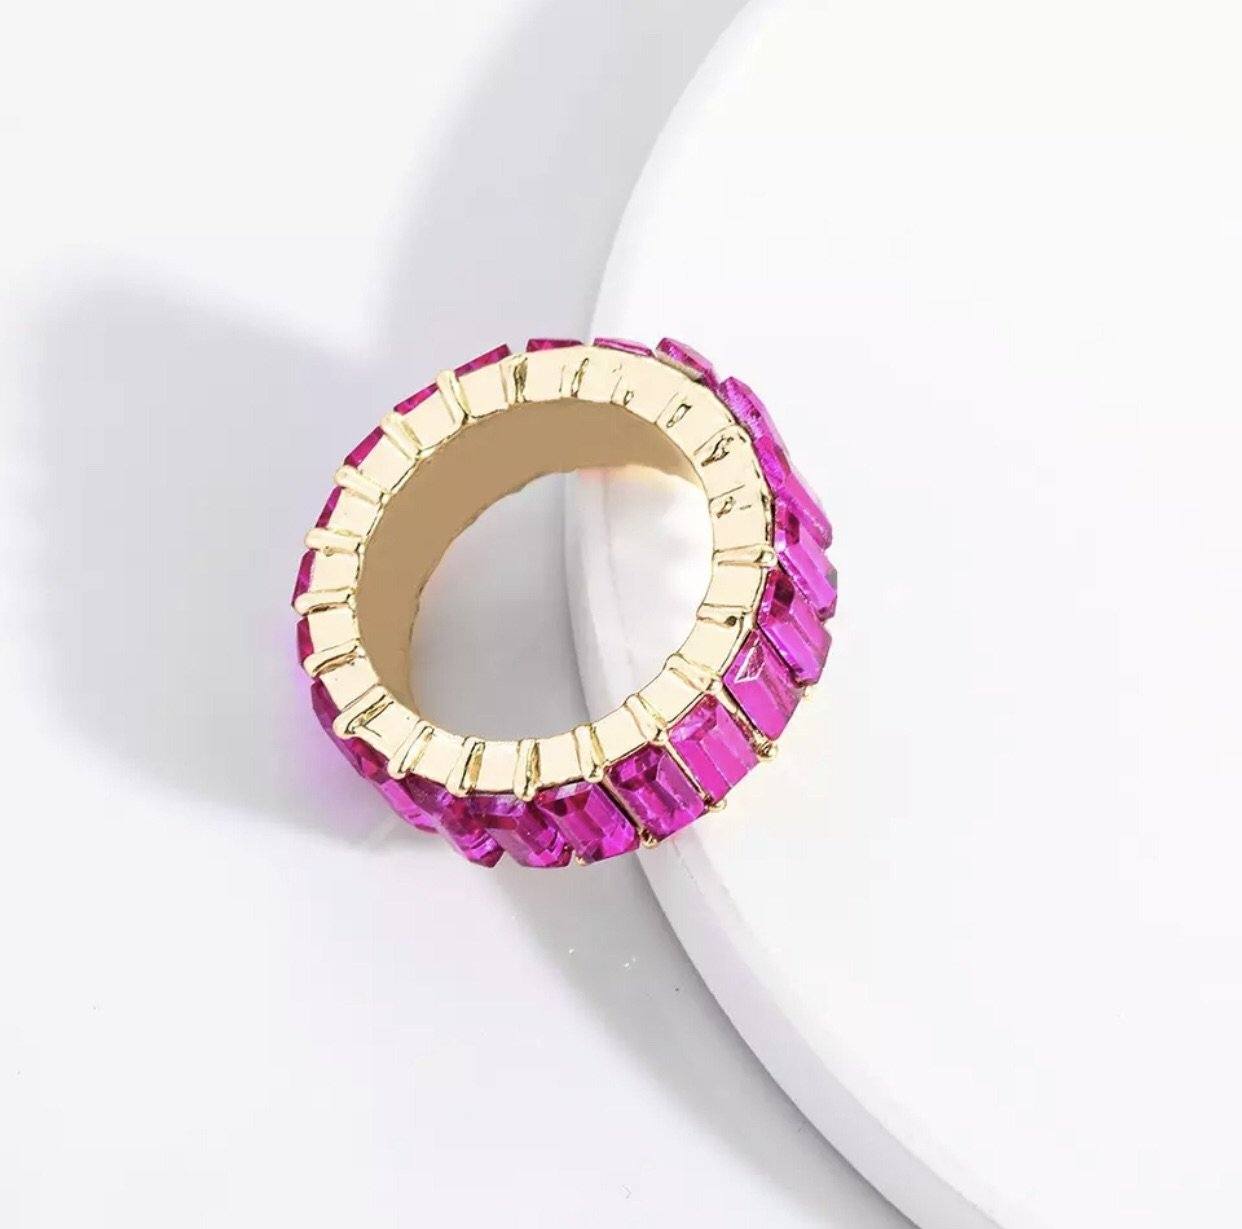 Buy Fuchsia Cocktail Crystal Ring, Hot Pink Statement Crystal Ring, Fuchsia  Statement Gold Crystal Ring, Adjustable Cocktail Pink Ring. Online in India  - Etsy